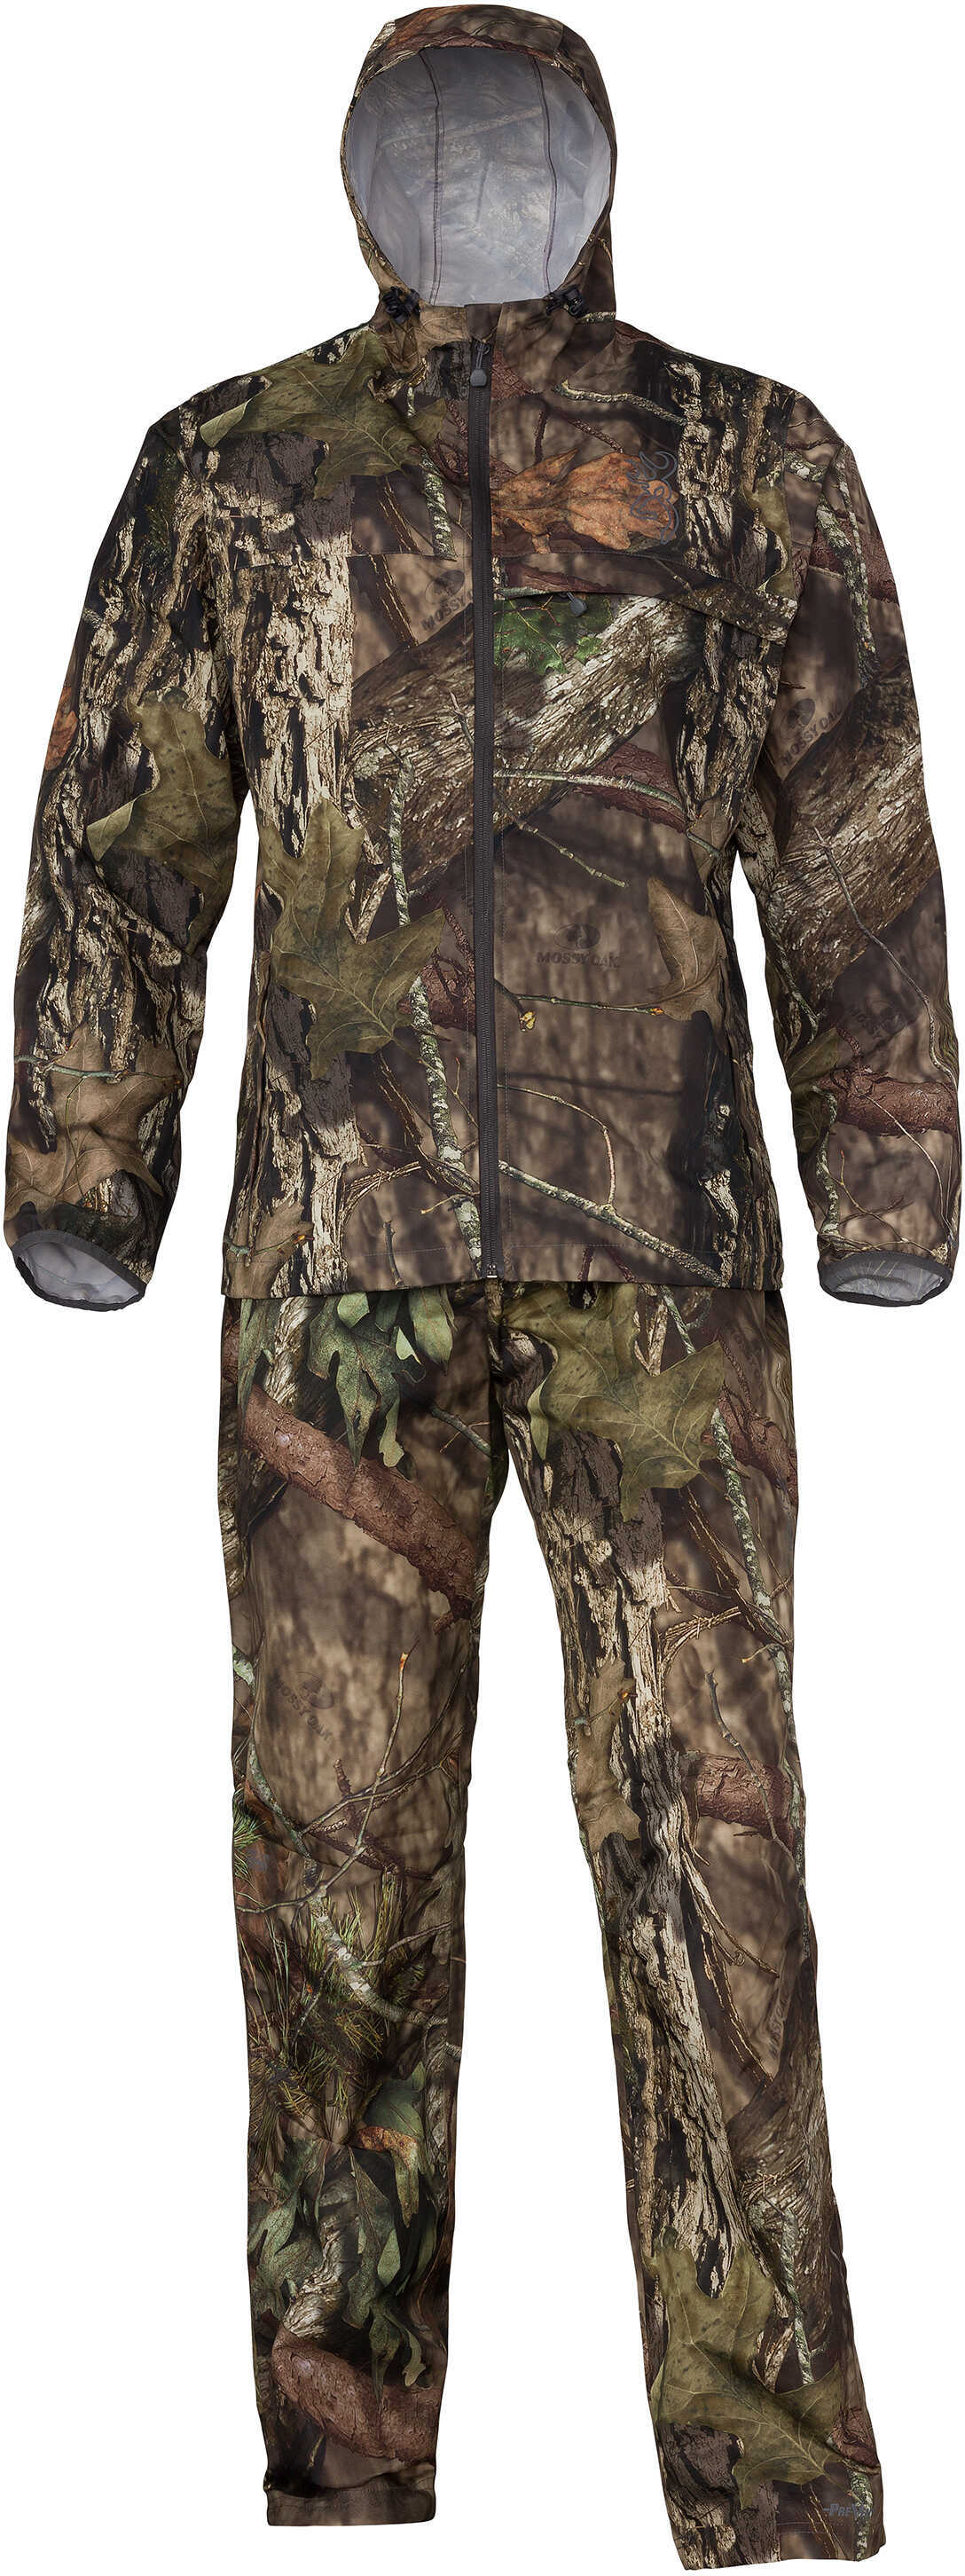 Browning CFS-WD Rain Suit, MOBUC, Small Color: Mossy Oak Break-Up Country